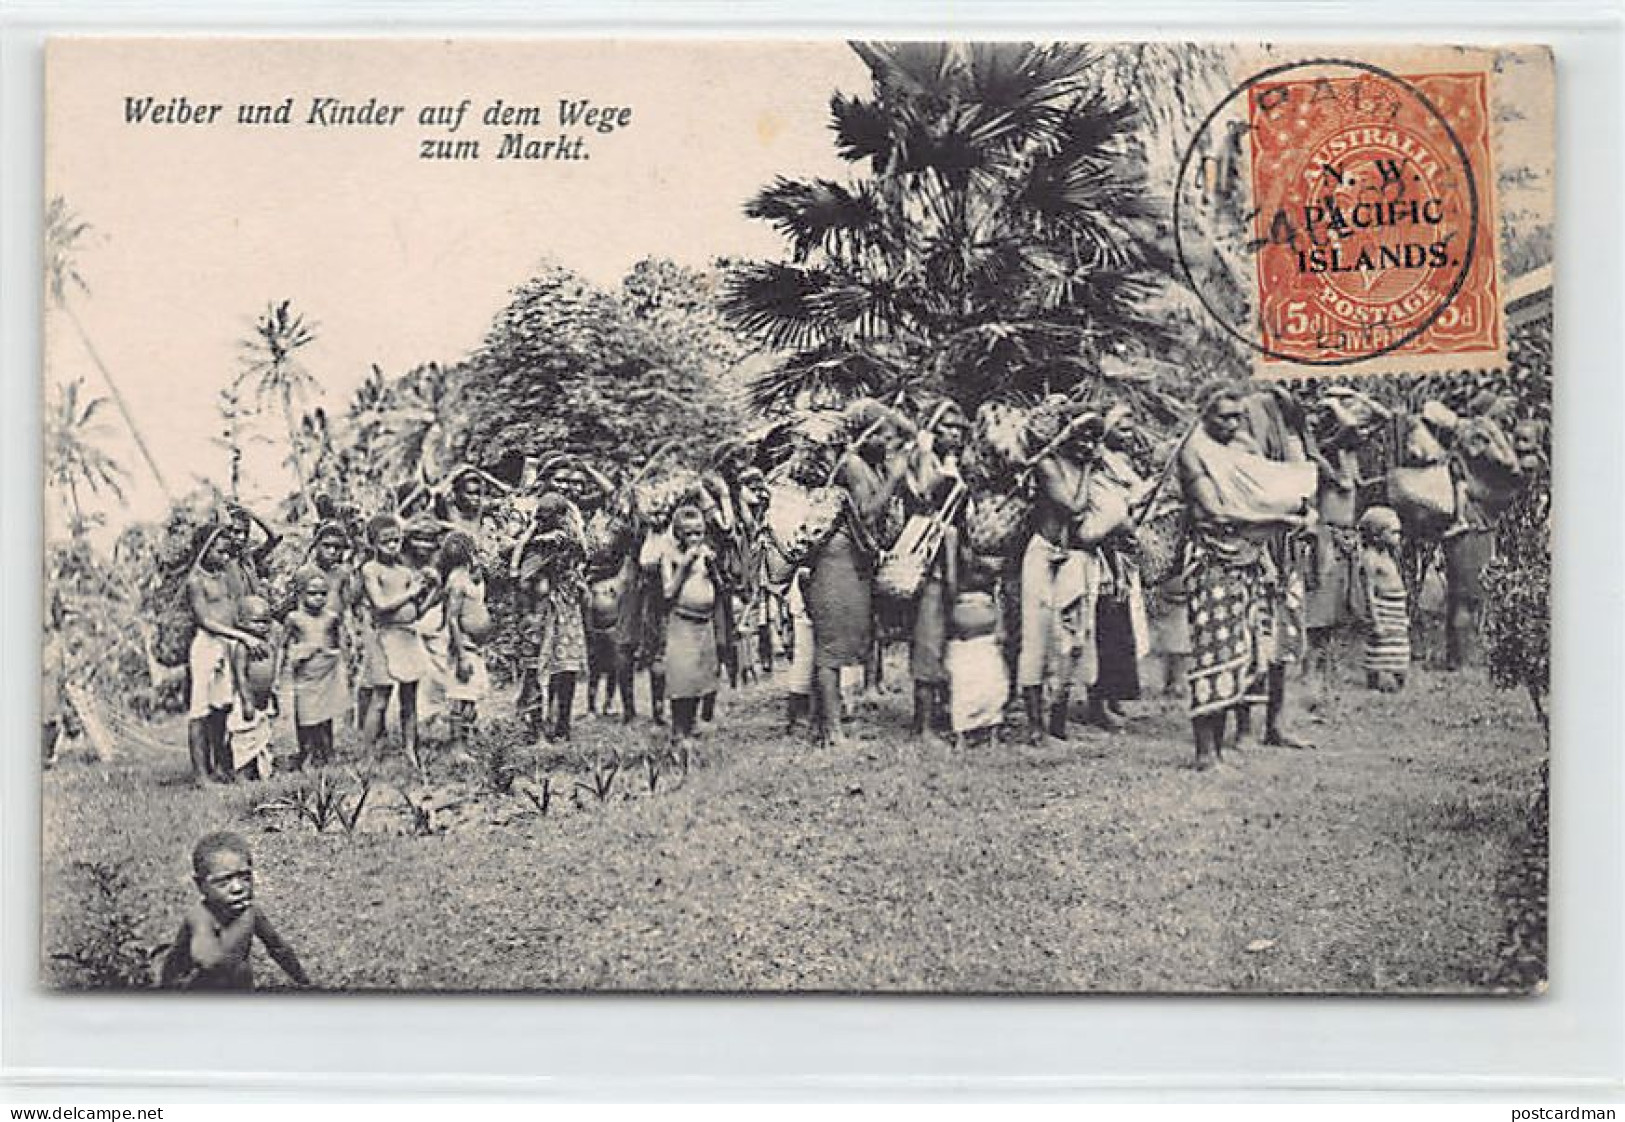 Papua New Guinea - NEW BRITAIN (New Pomerania) - Women And Children On The Way T - Papouasie-Nouvelle-Guinée